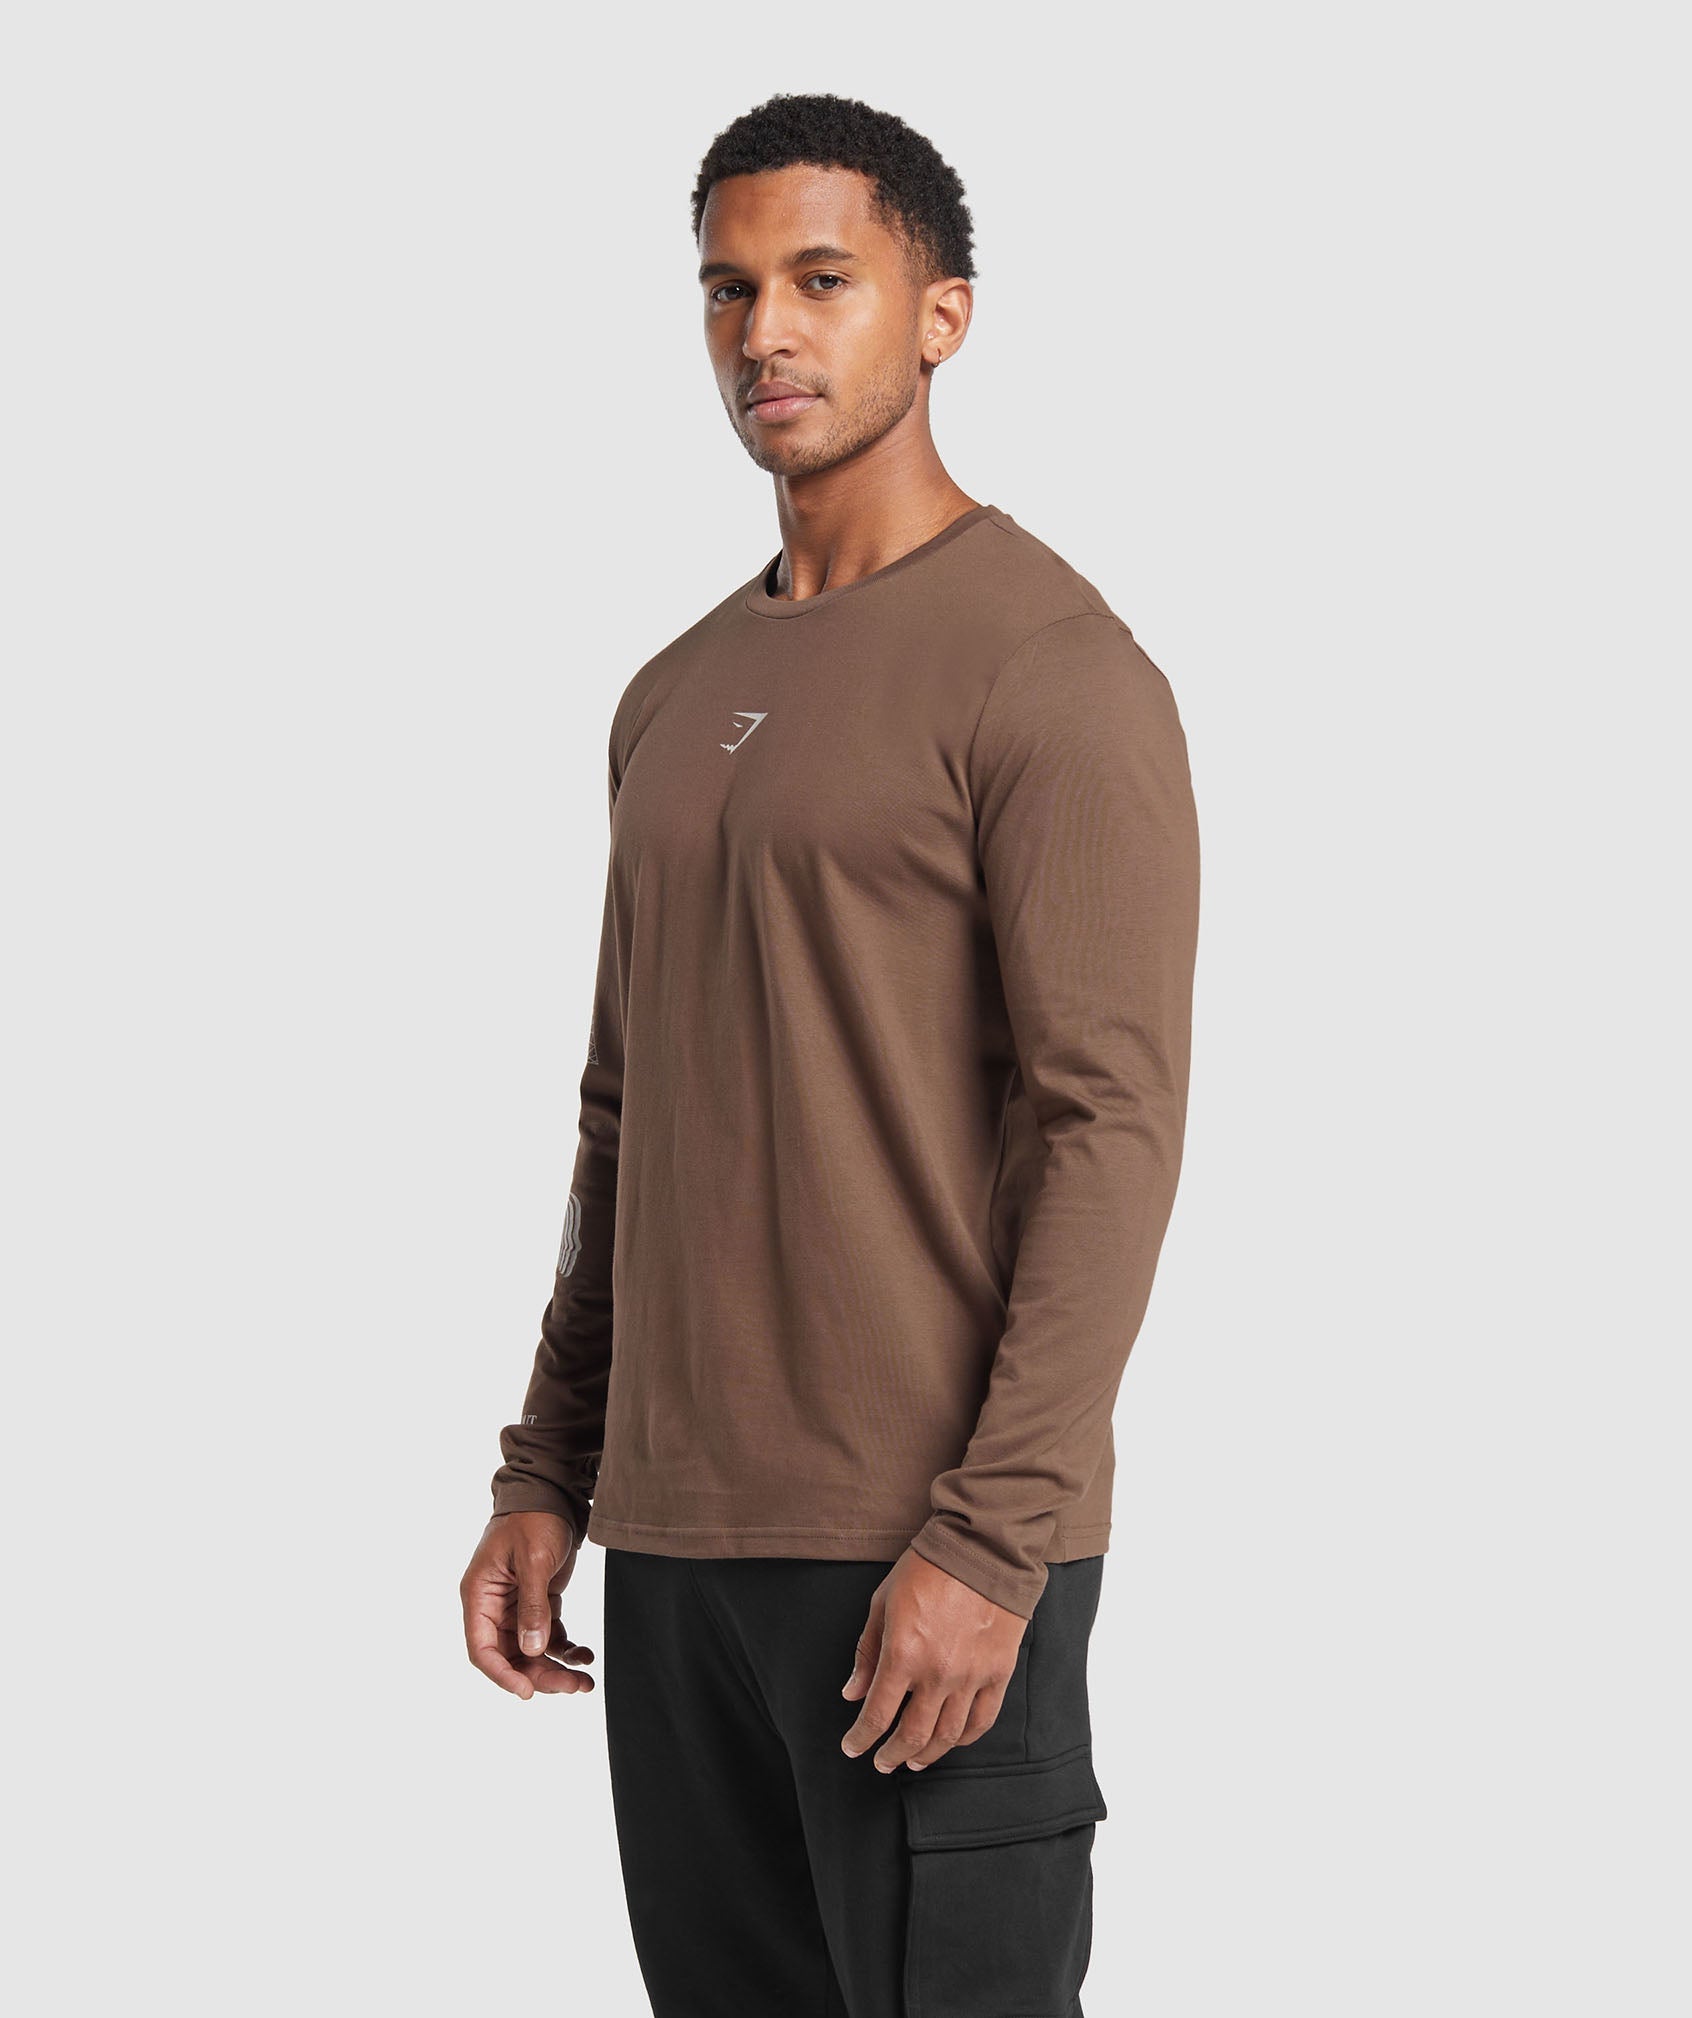 Hybrid Wellness Long Sleeve T-Shirt in Penny Brown - view 3